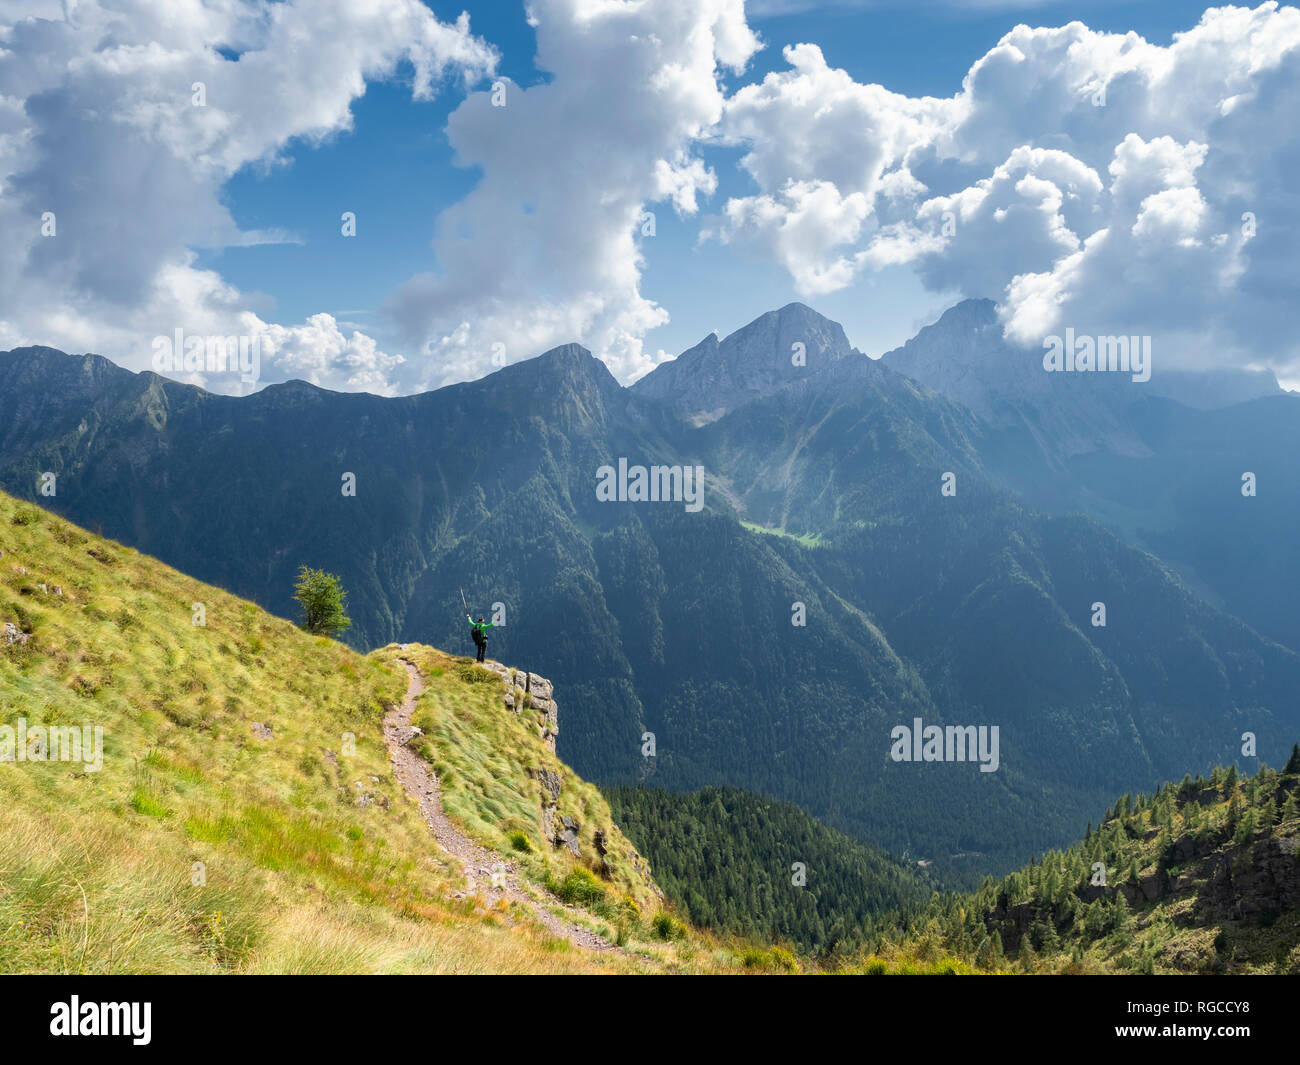 Italy, Lombardy, Valle di Scalve, hiker on hiking trail, Mount Camino Stock Photo